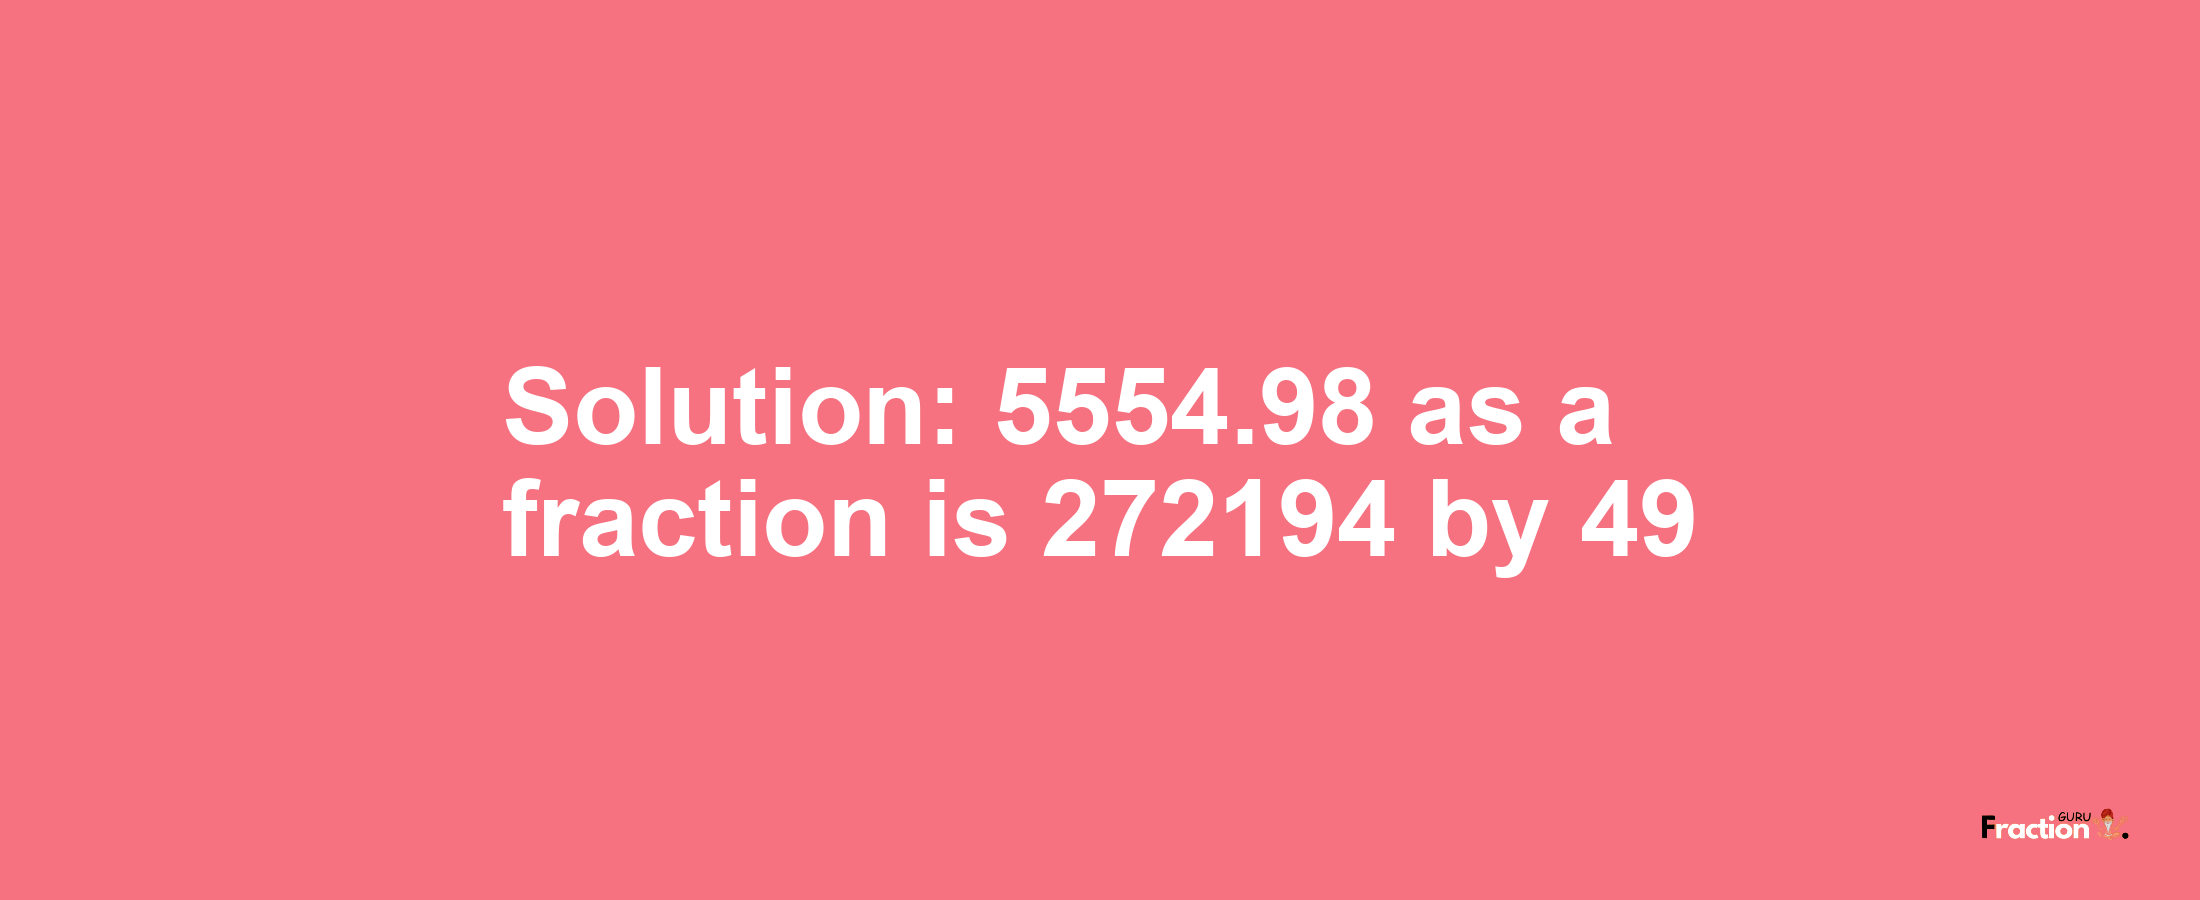 Solution:5554.98 as a fraction is 272194/49